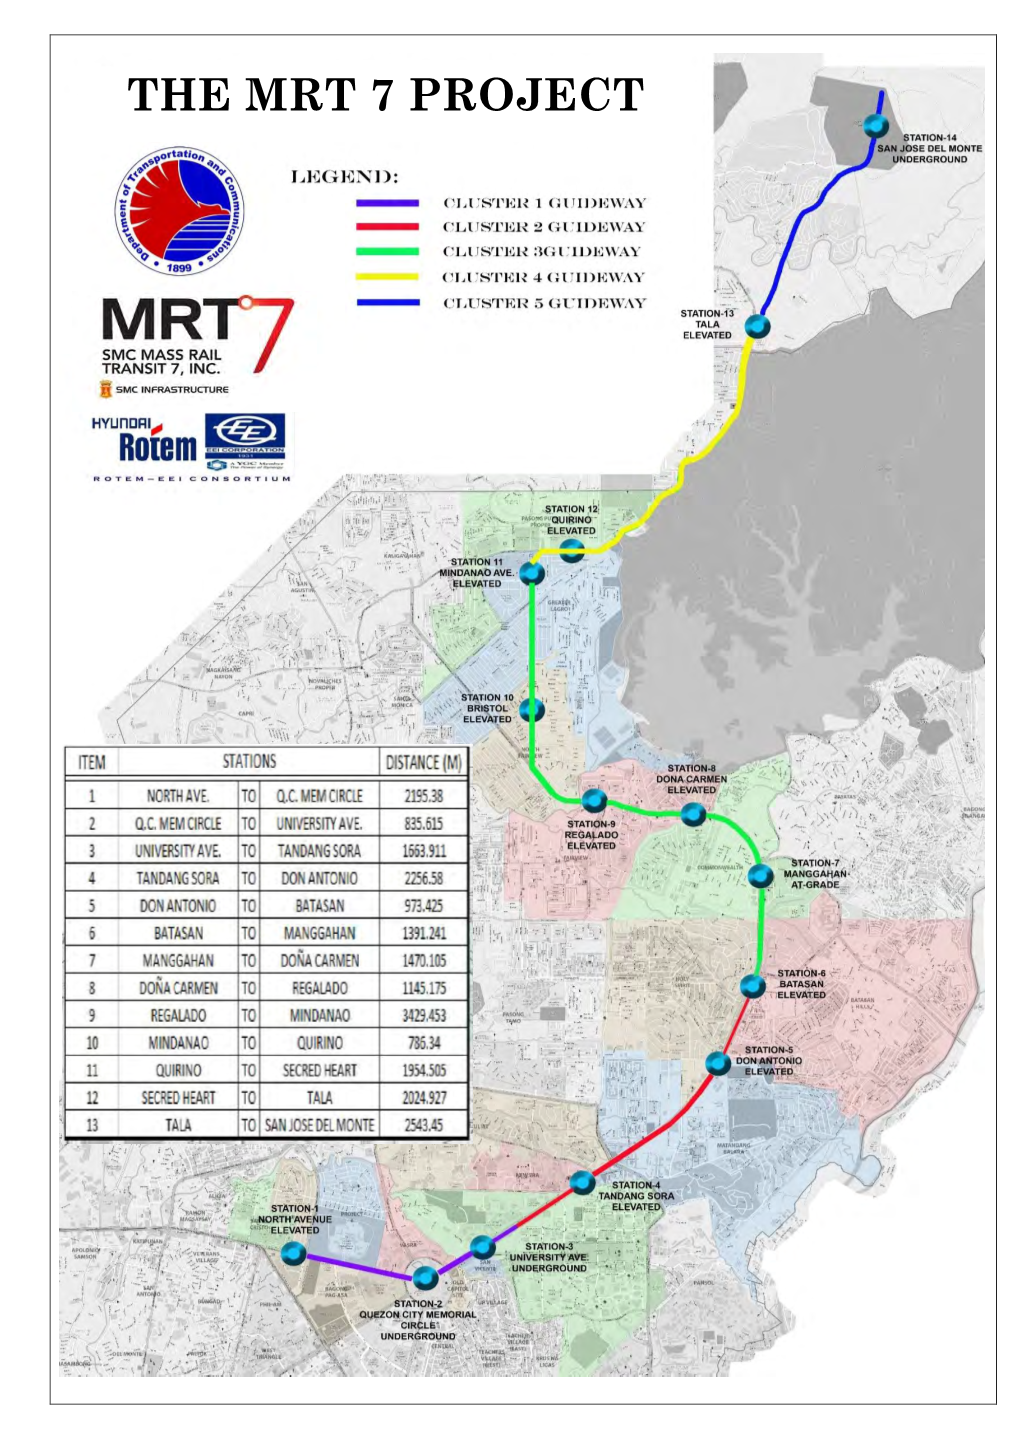 The Mrt 7 Project